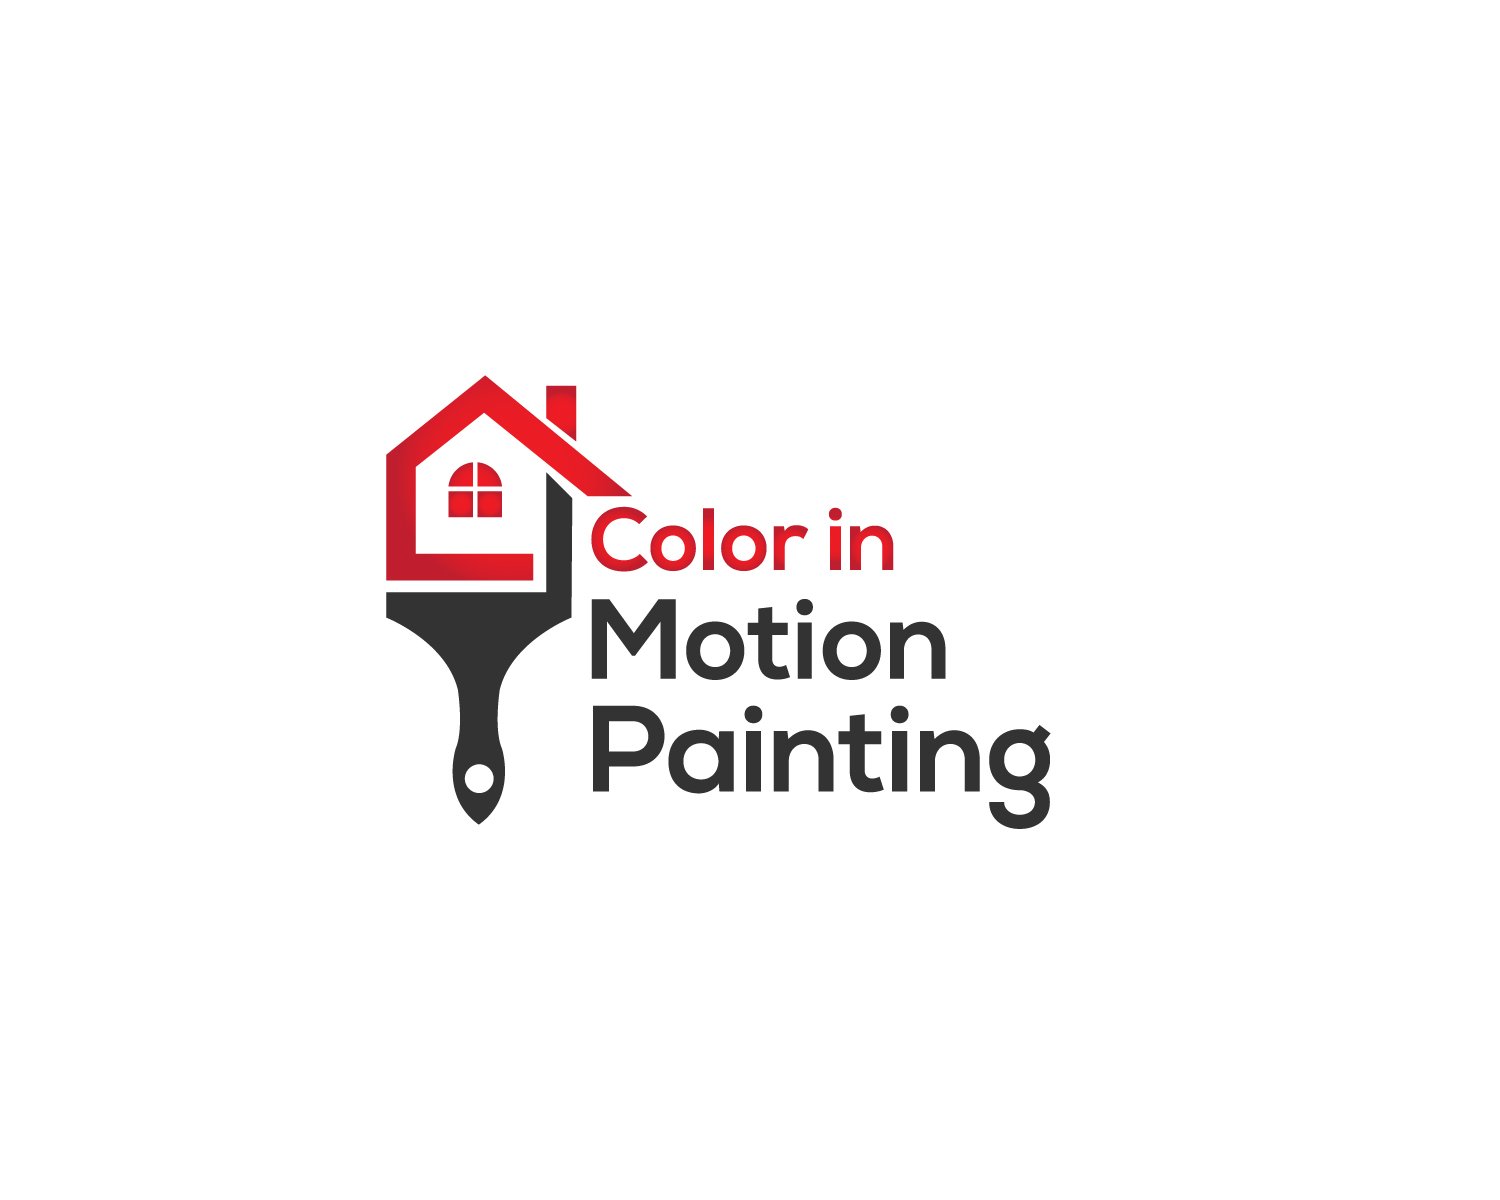 Color in Motion Painting Logo